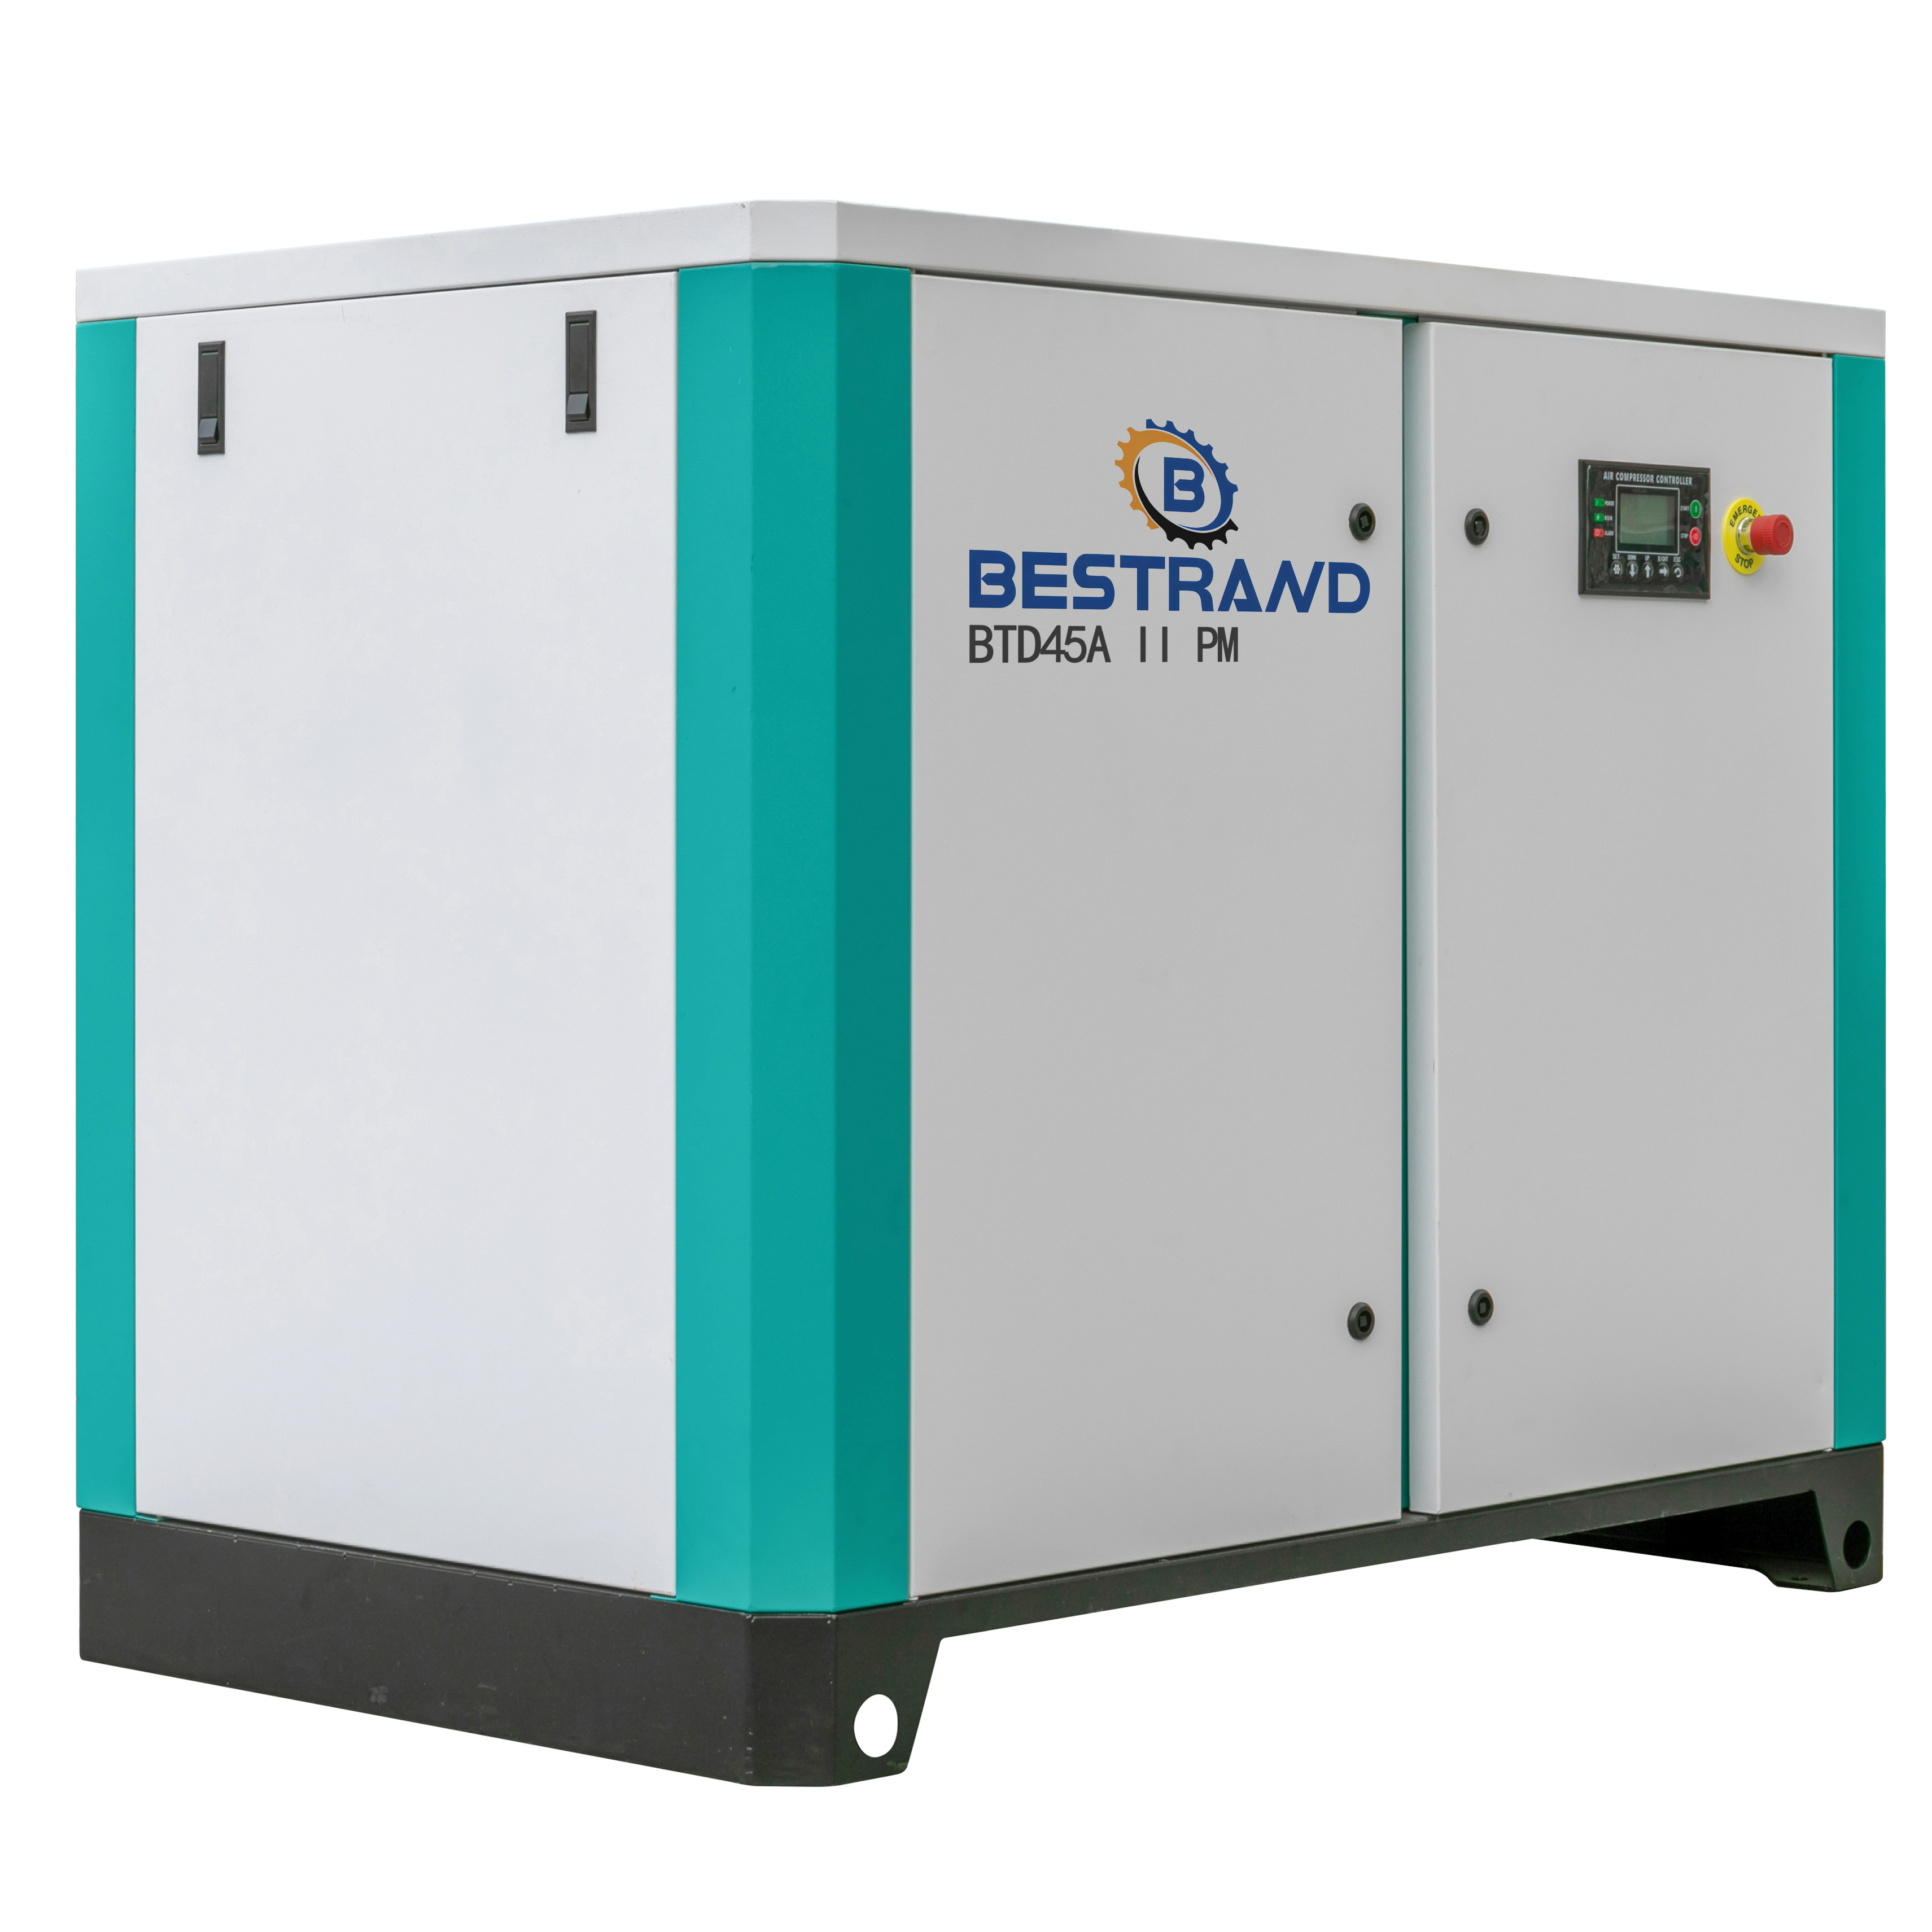 BESTRAND Permanent Magnet Inverter Two-stage Screw Air Compressor BTD45A II PM